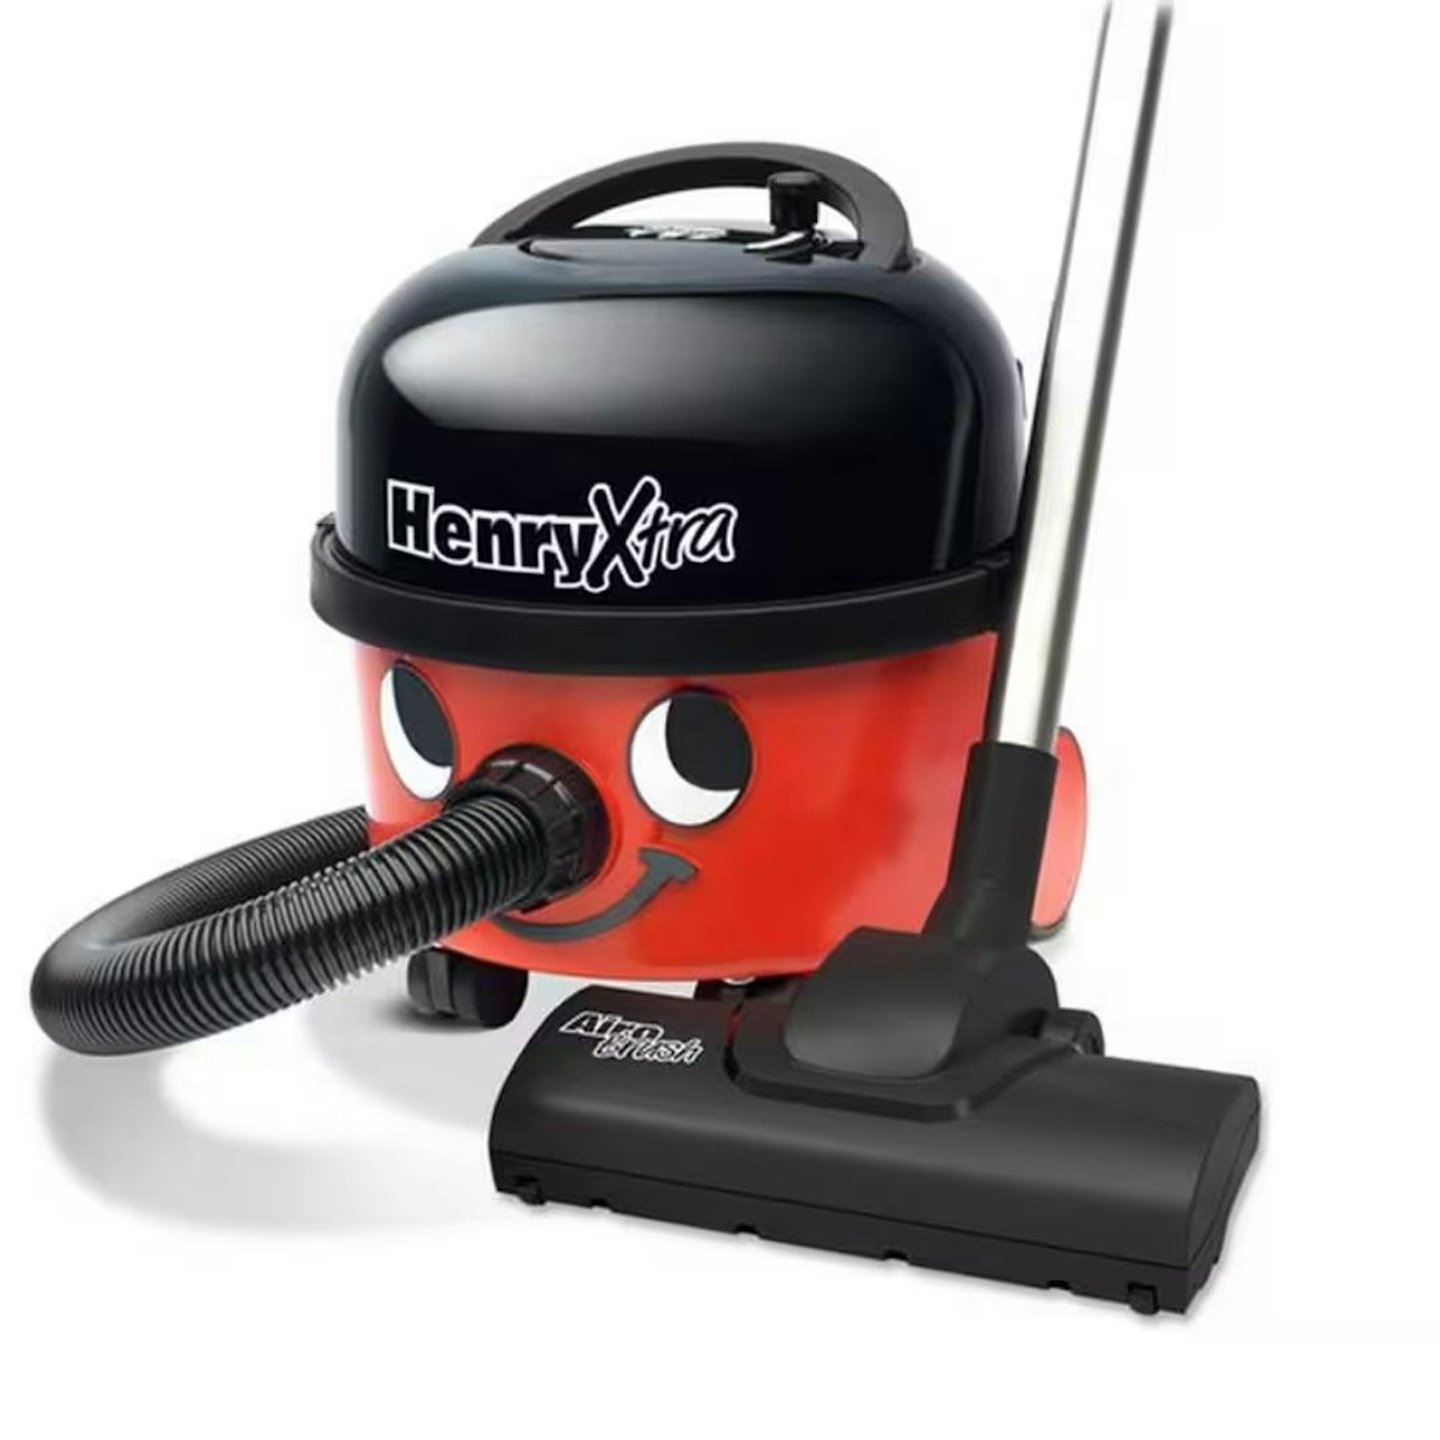 The best Argos deals: Henry Xtra Corded Bagged Cylinder Vacuum Cleaner